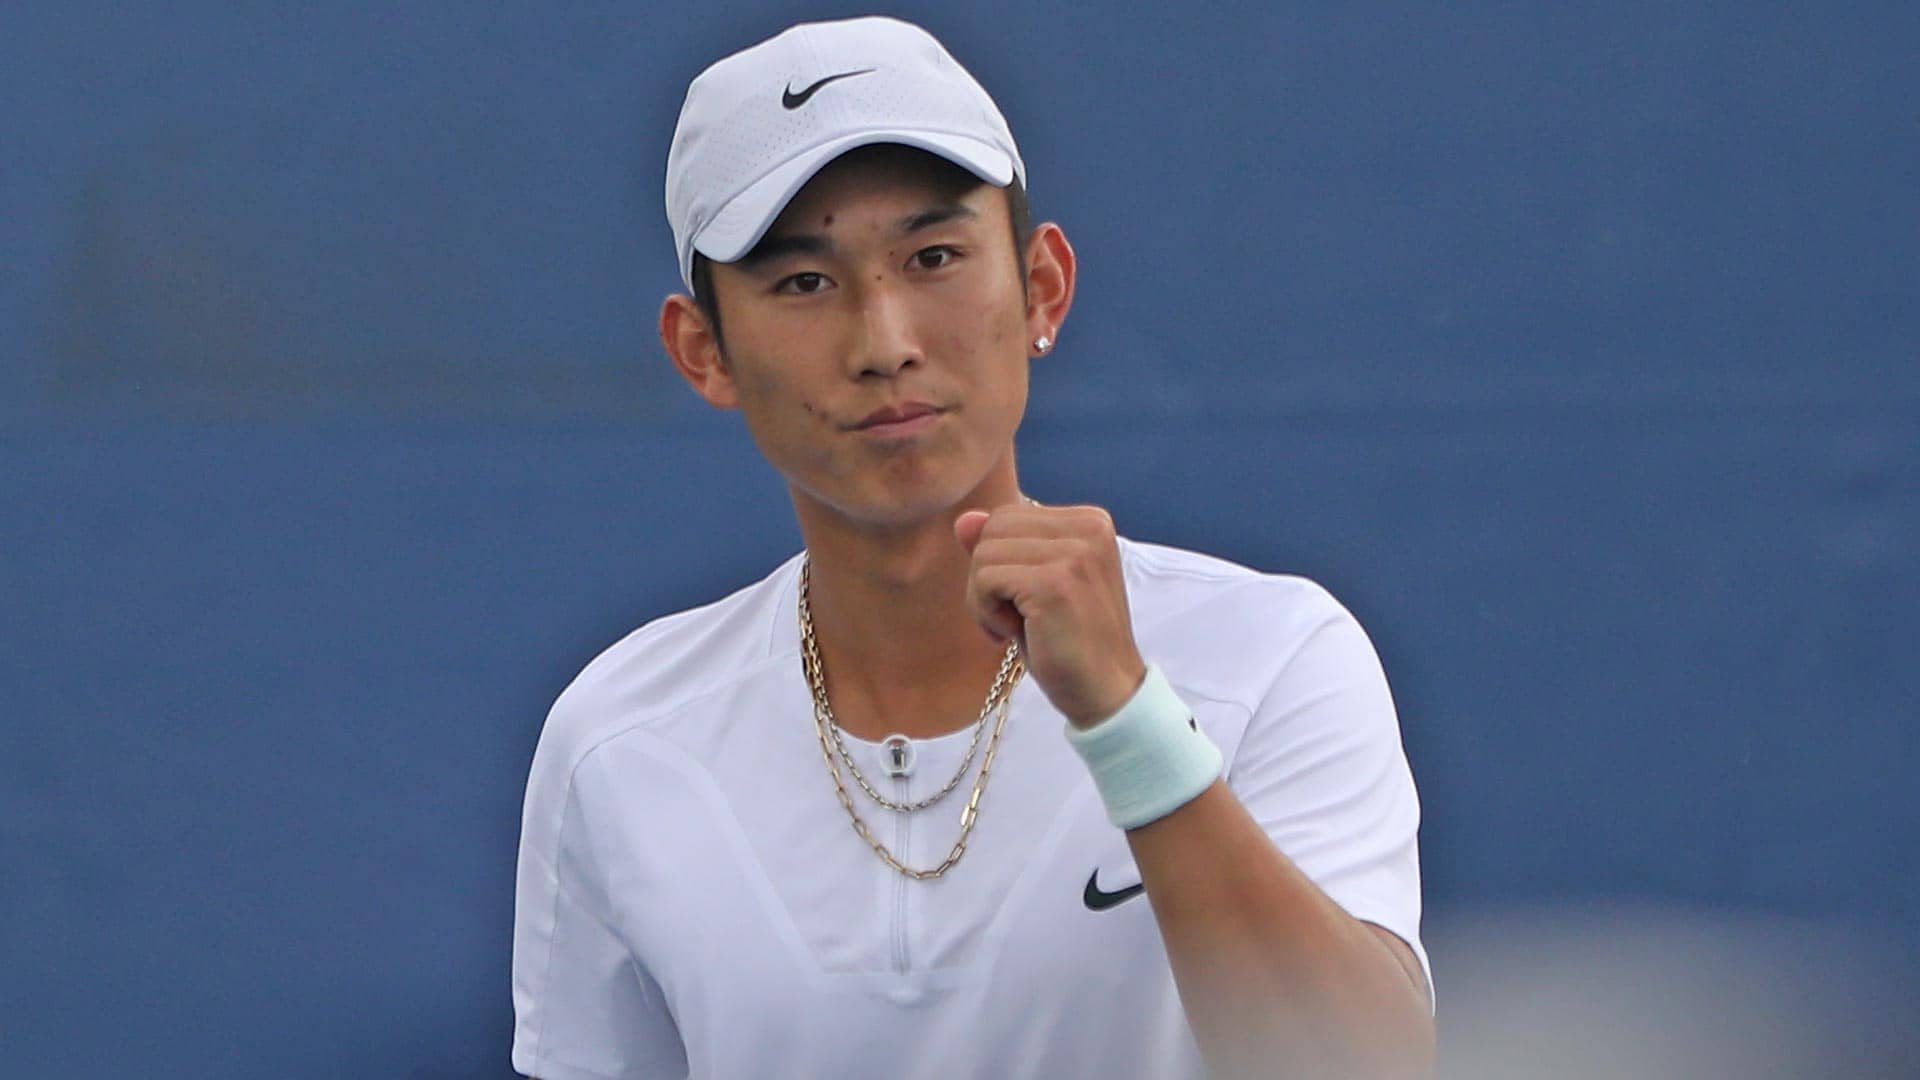 Shang Juncheng this month cracked the Top 150 in the Pepperstone ATP Rankings for the first time.